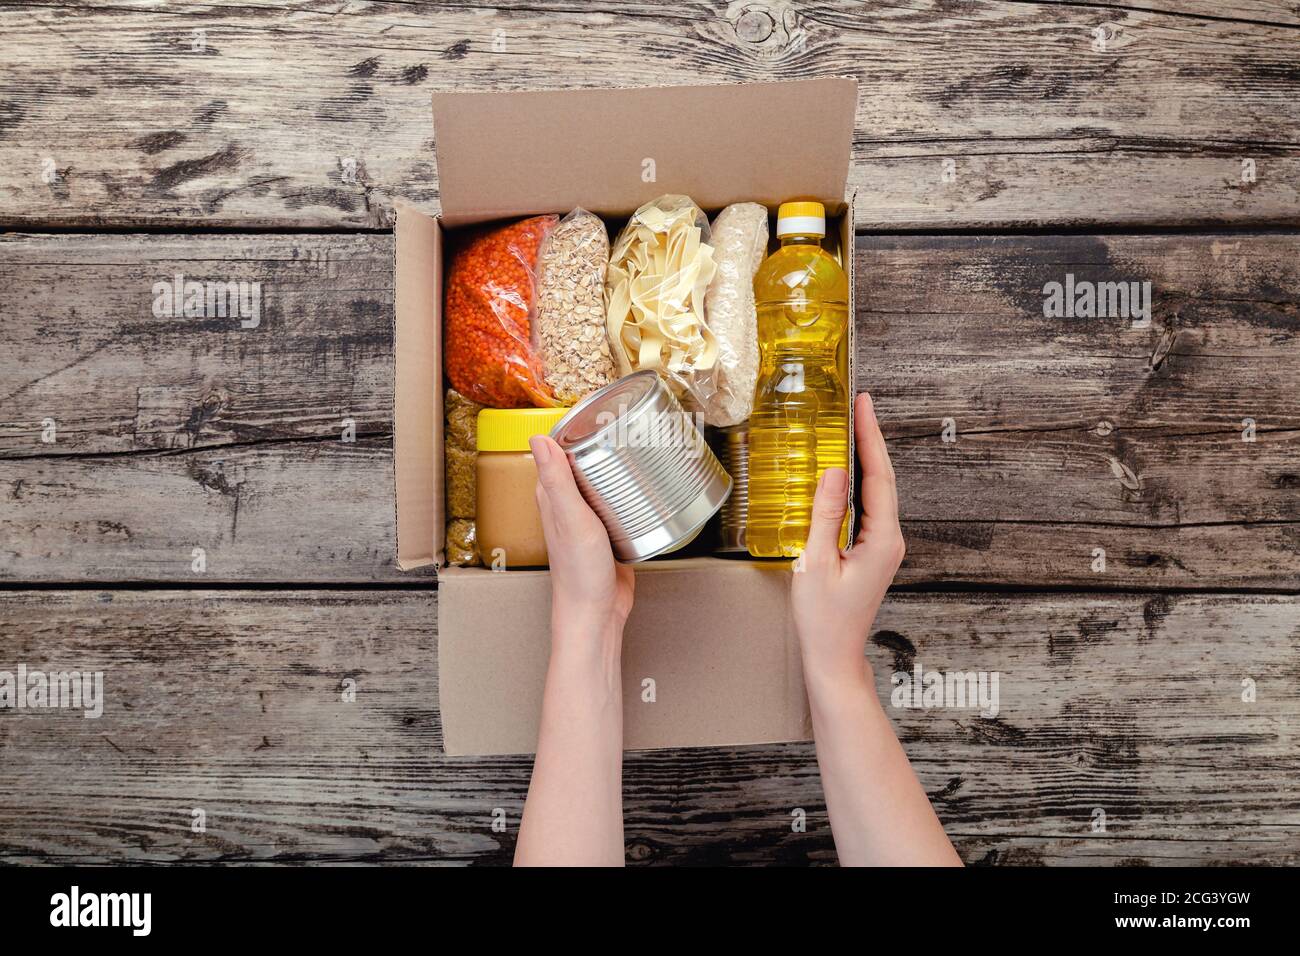 Female hands packing donation box with food items of staple products on wooden table. Person woman receiving donation Food box. Donate Food delivery Stock Photo